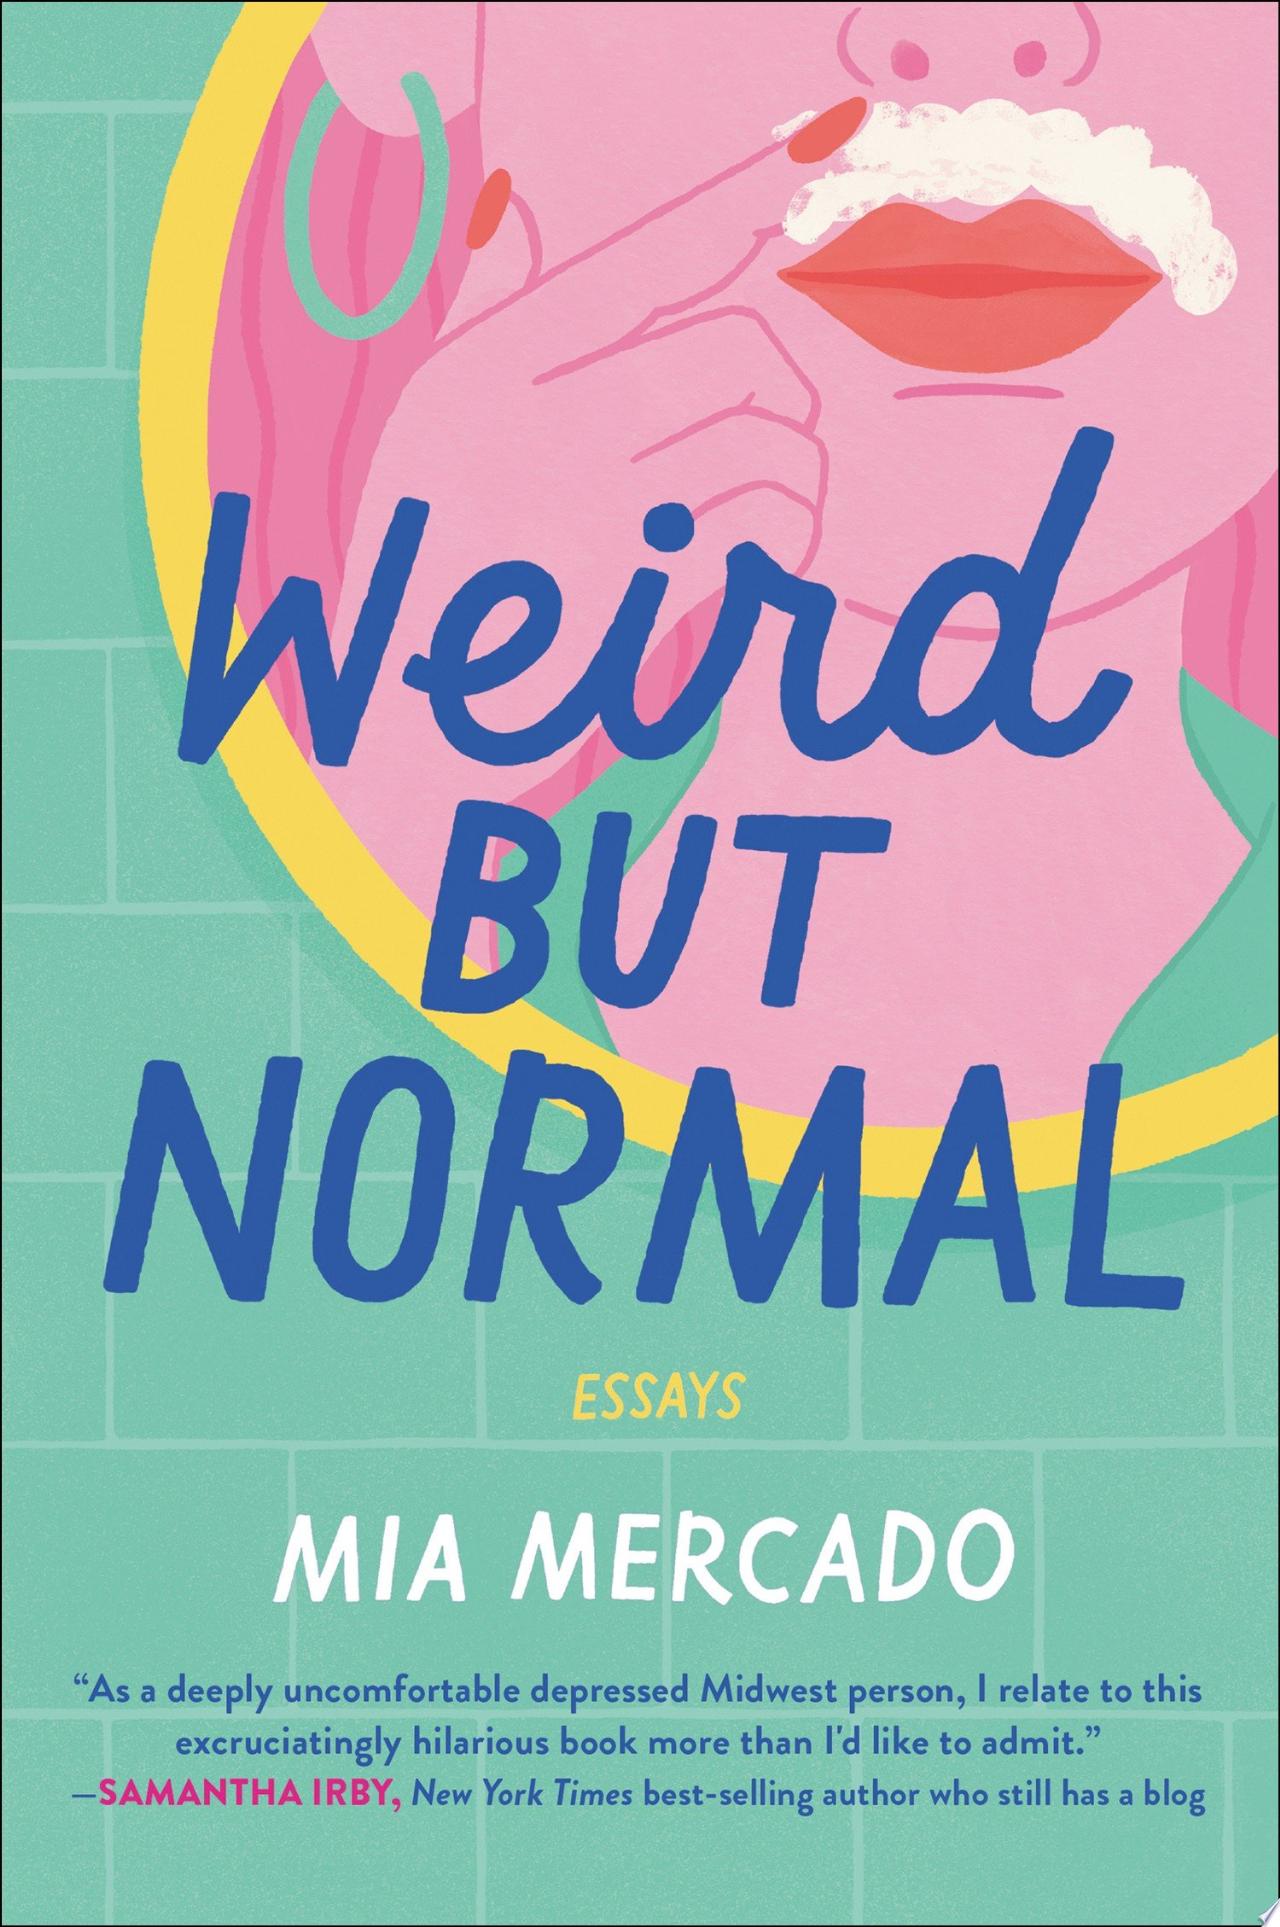 An image of the book cover for the book Weird but Normal